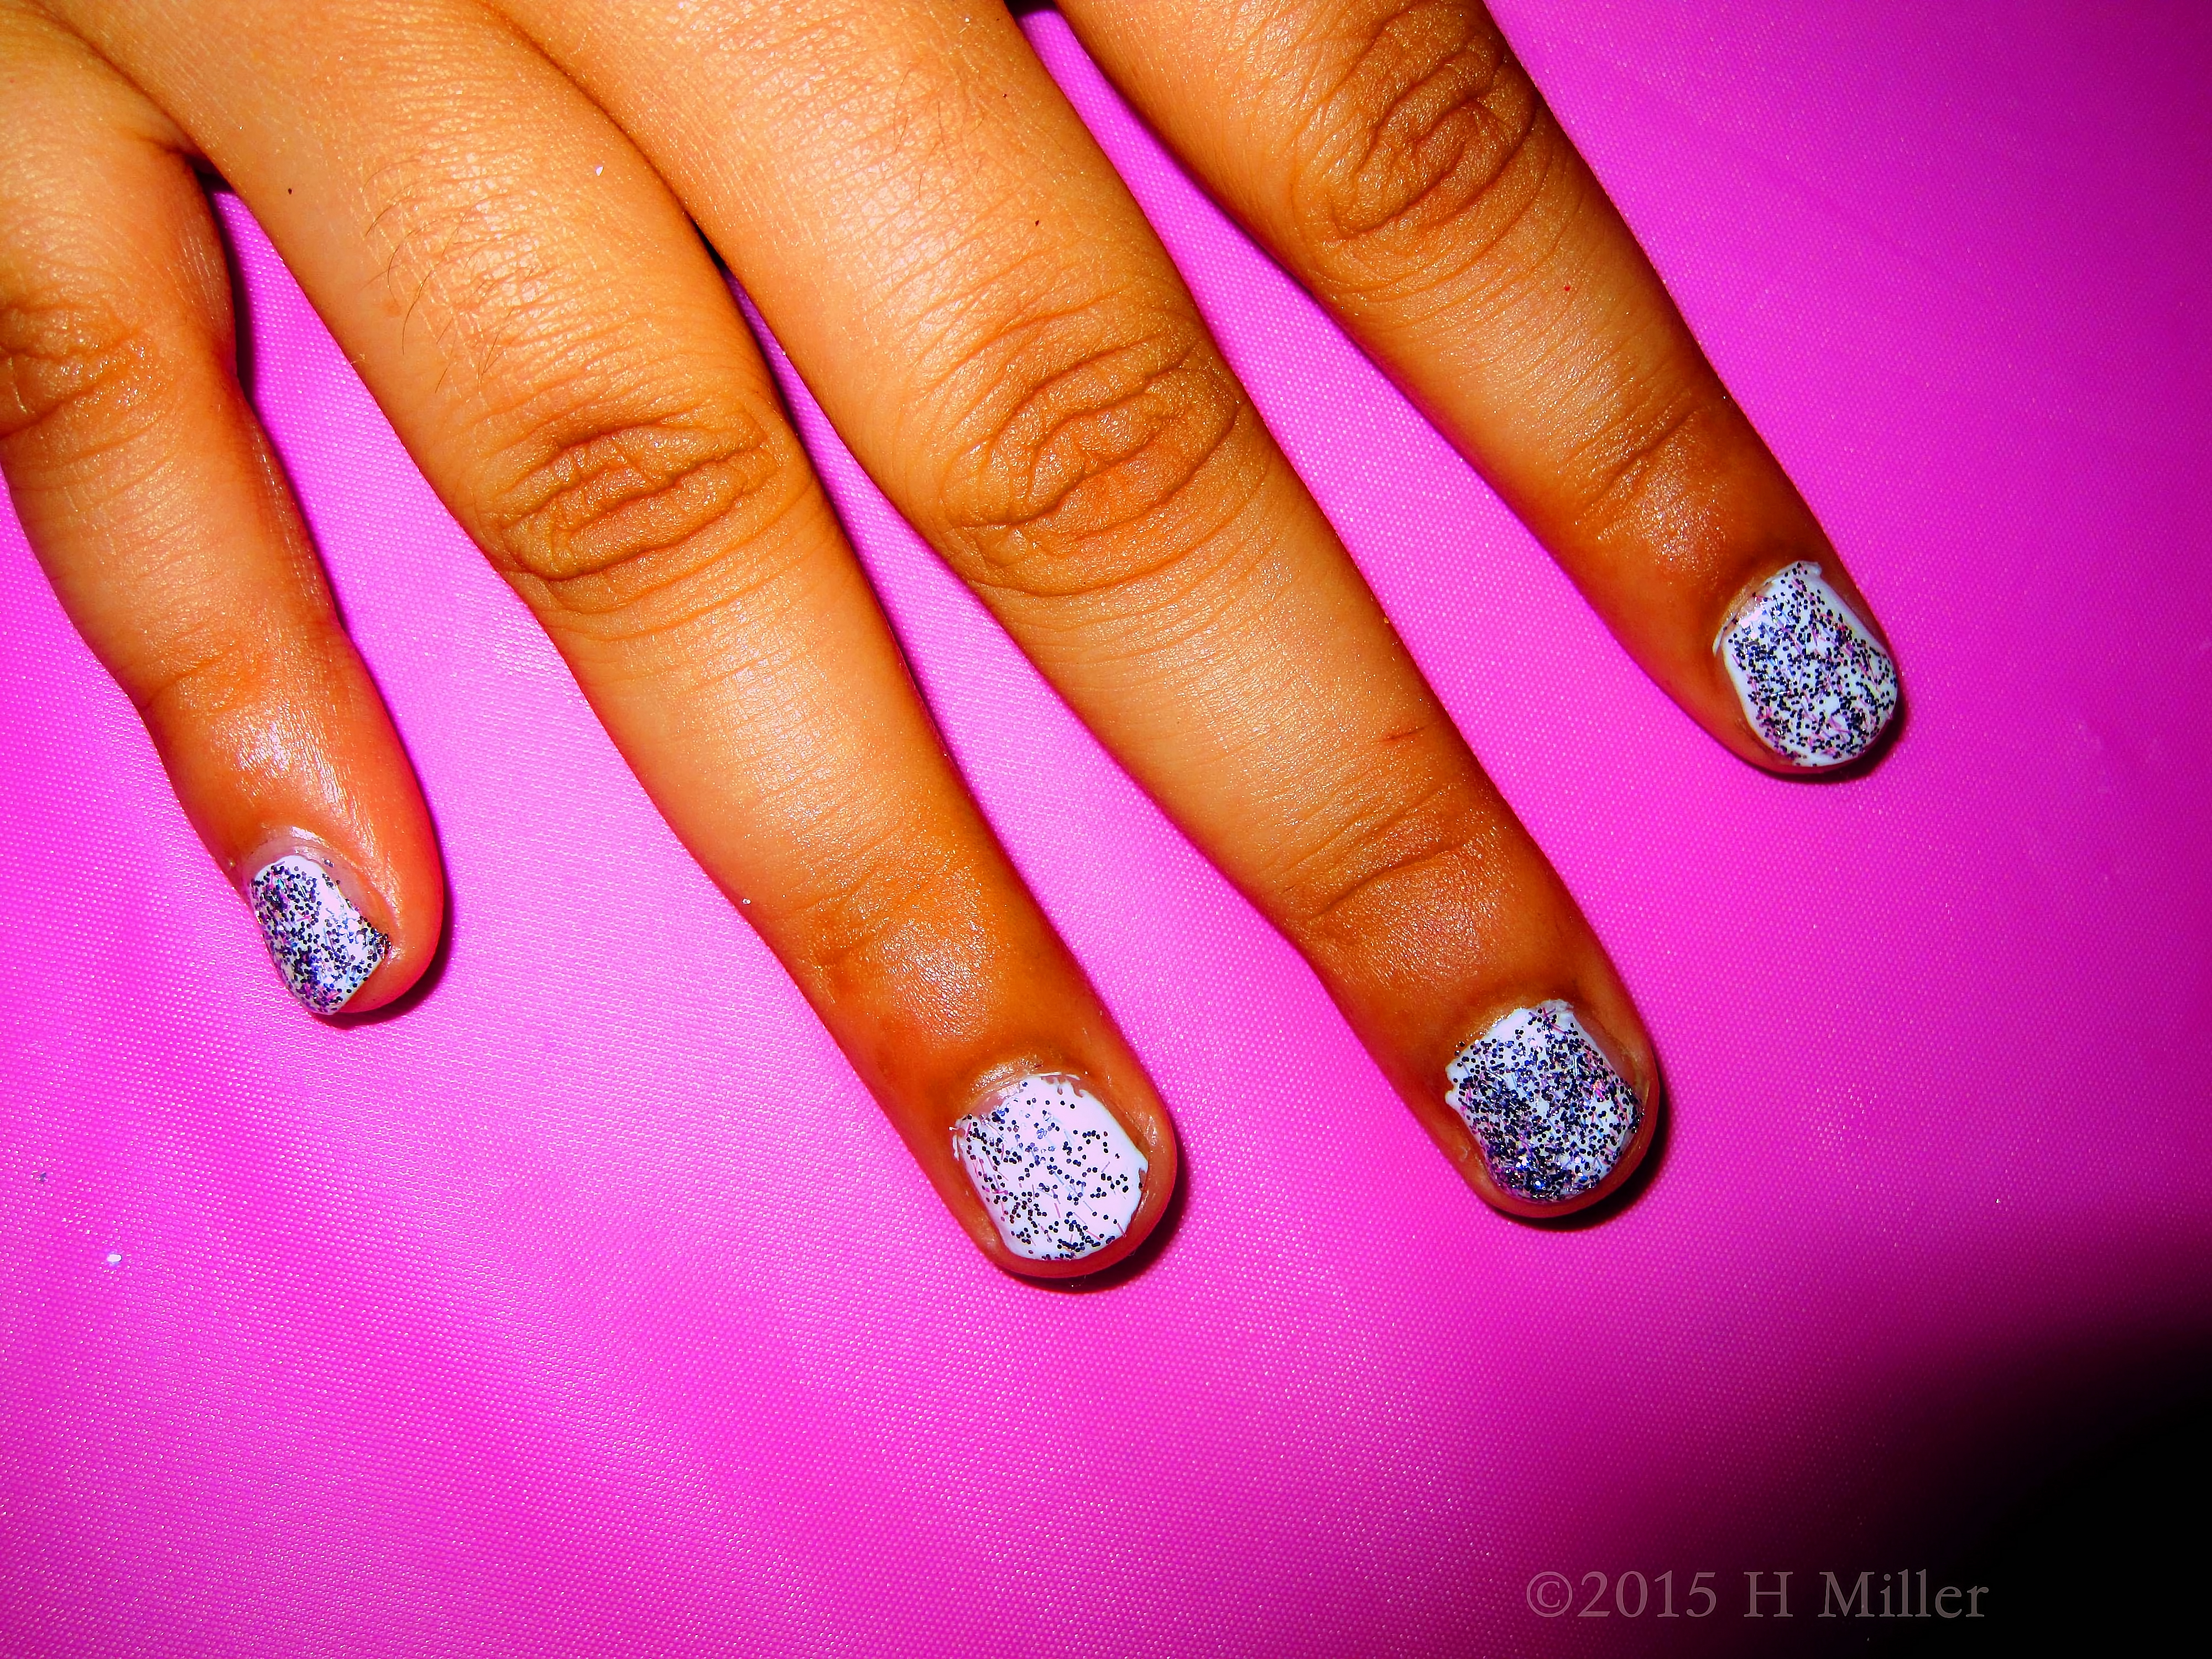 Pink Overlaid With White Shatter And Lots Of Silvery Glitter! 